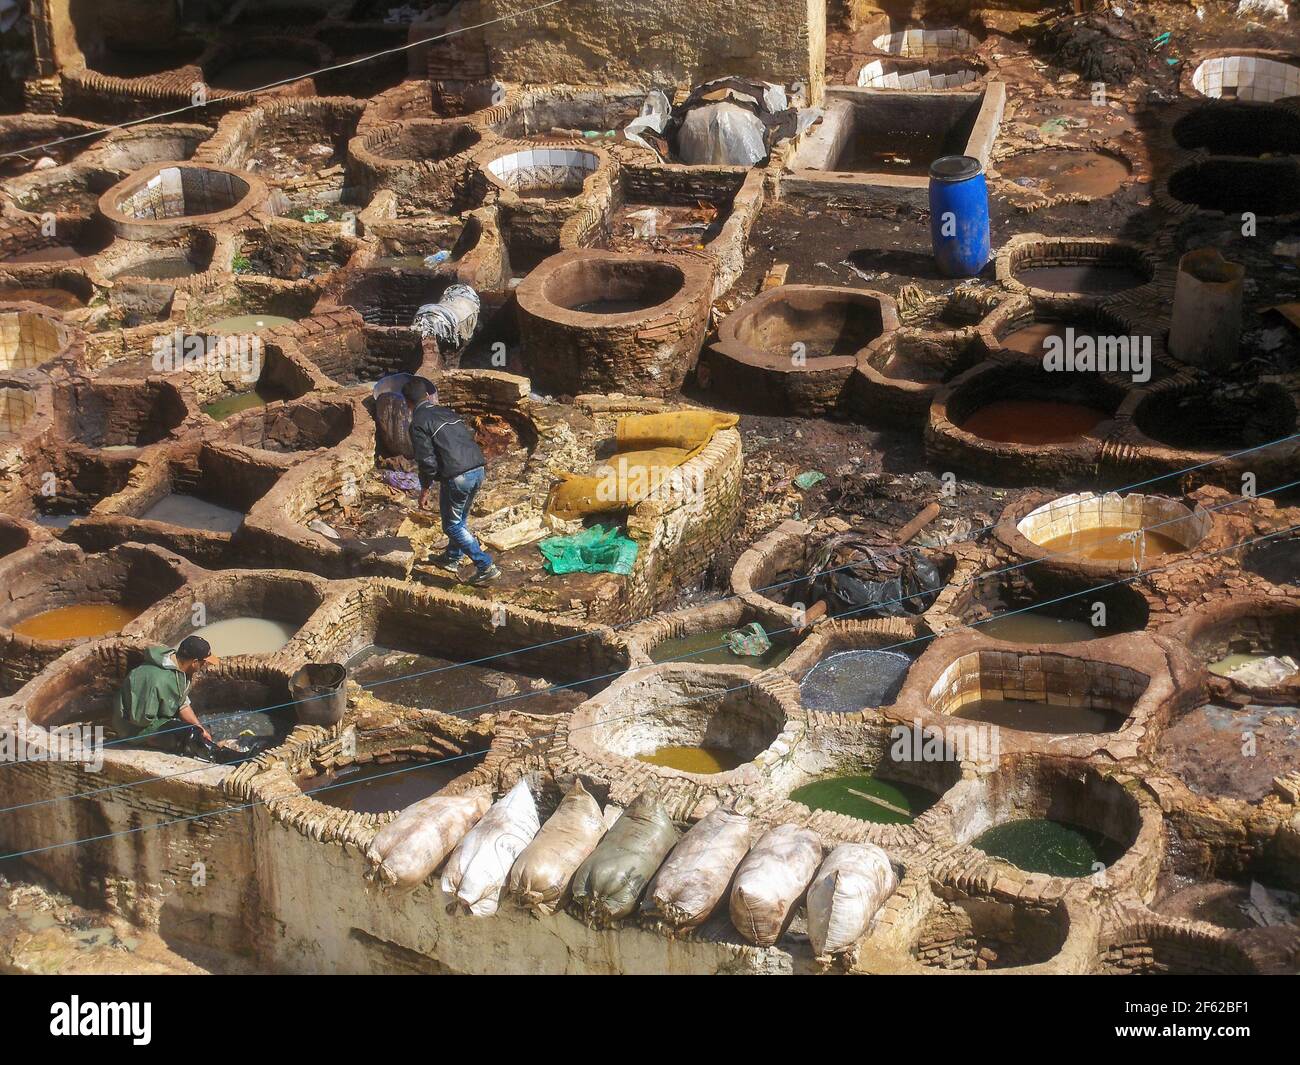 Fez, Morocco - March 24, 2013: Workers tanning and dyeing hides in the casbah of Fez, one of the most beautiful Moroccan cities Stock Photo